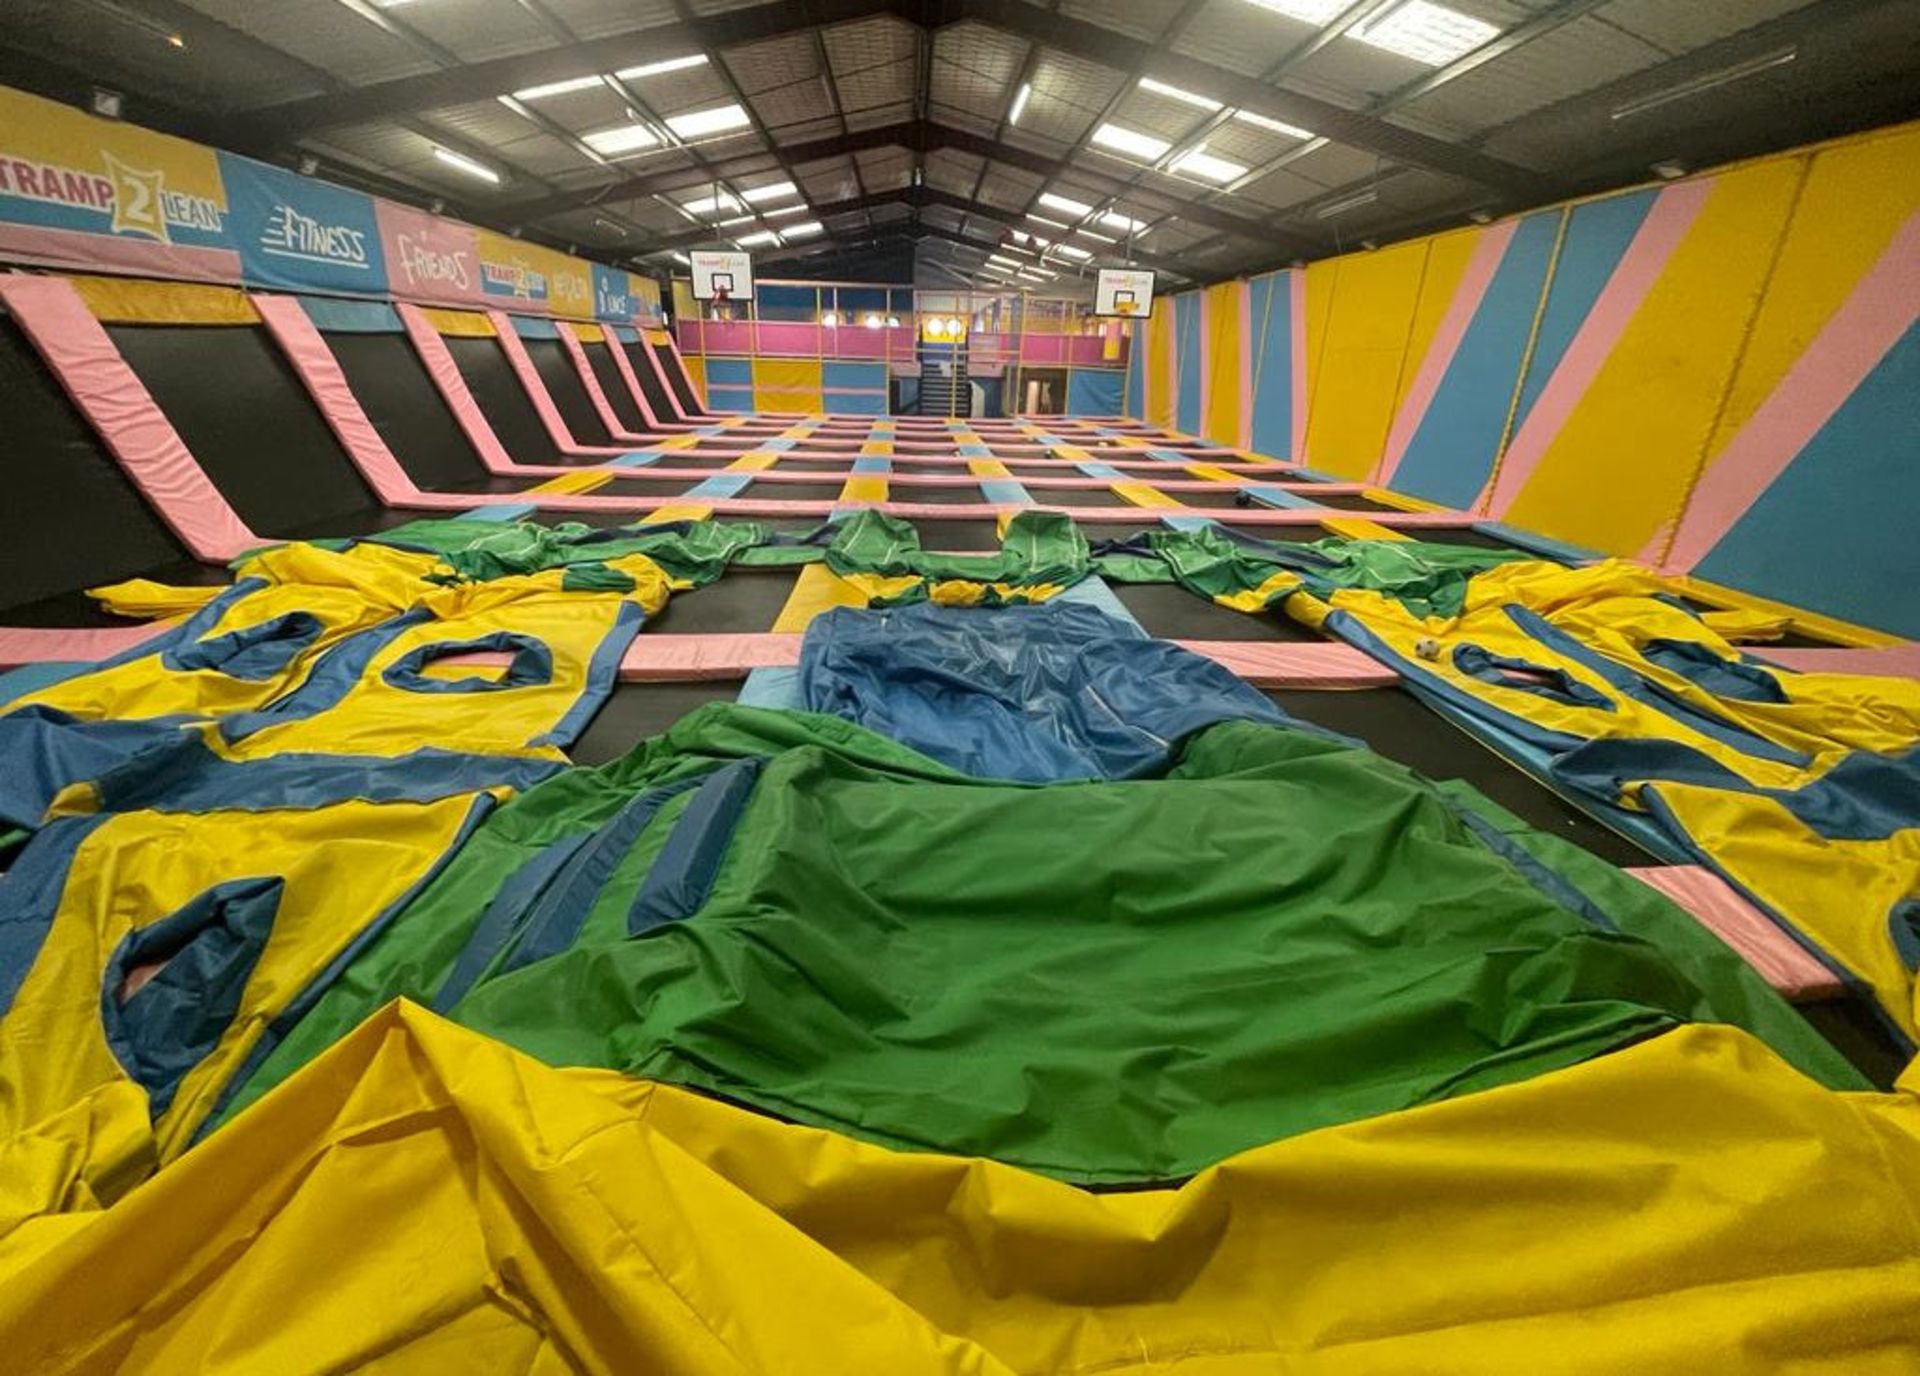 1 x Trampoline Park With Over 40 Interconnected Trampolines, Inflatable Activity Area, Waiting - Image 25 of 99